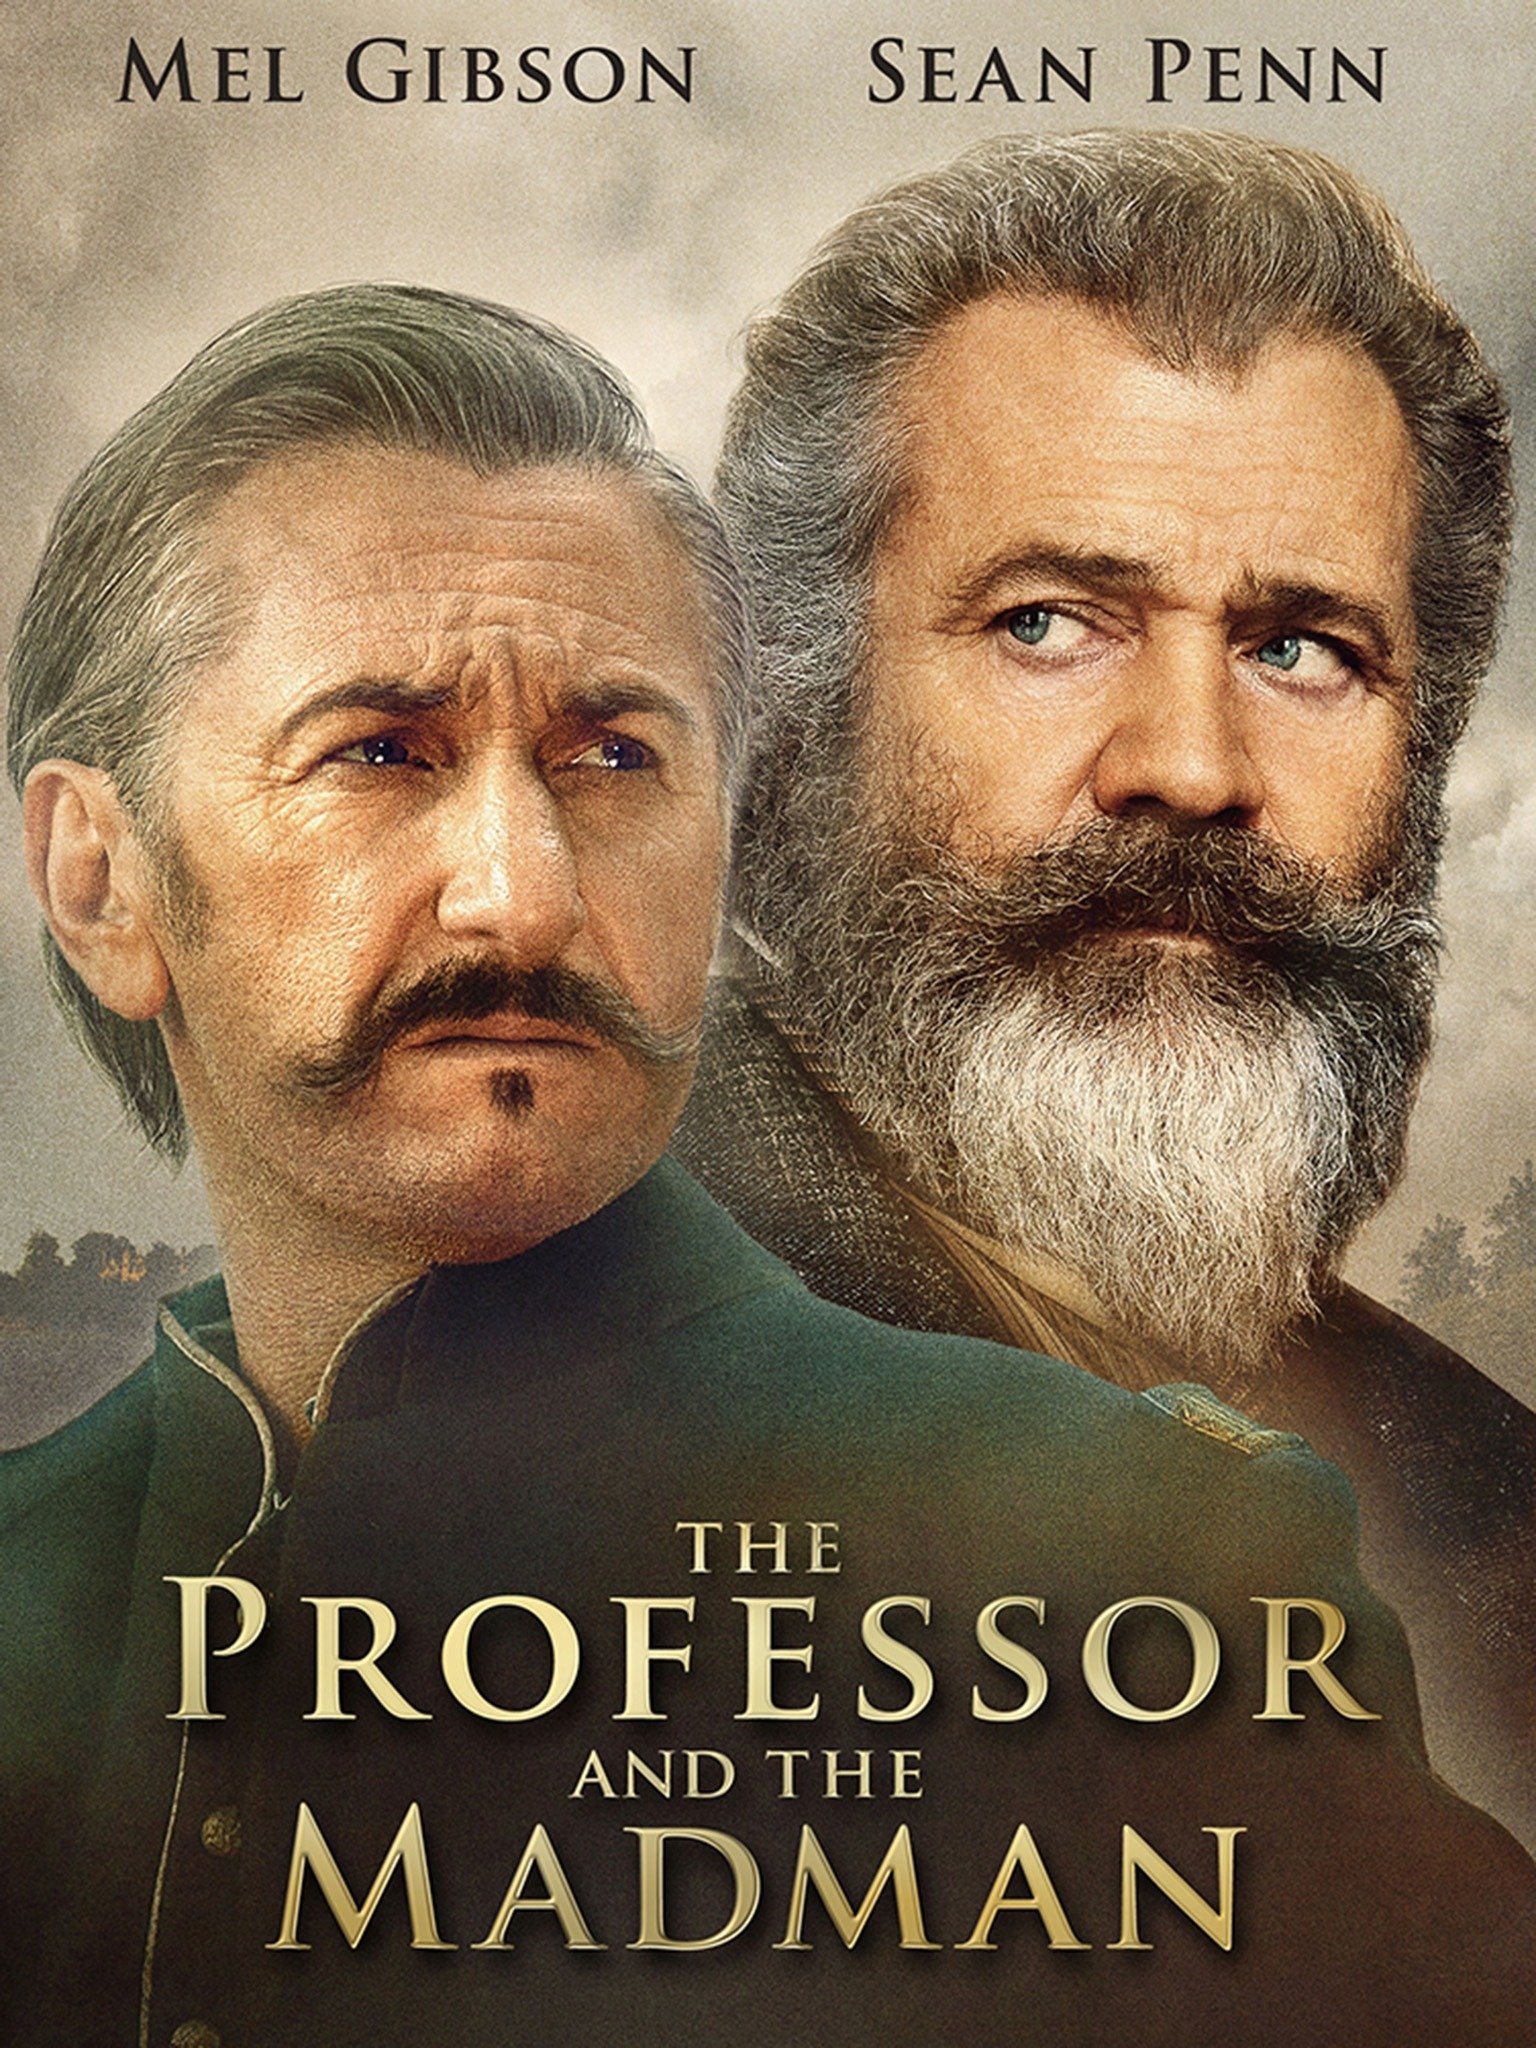 The Professor and the Madman: Trailer 2 - Trailers & Videos - Rotten ...